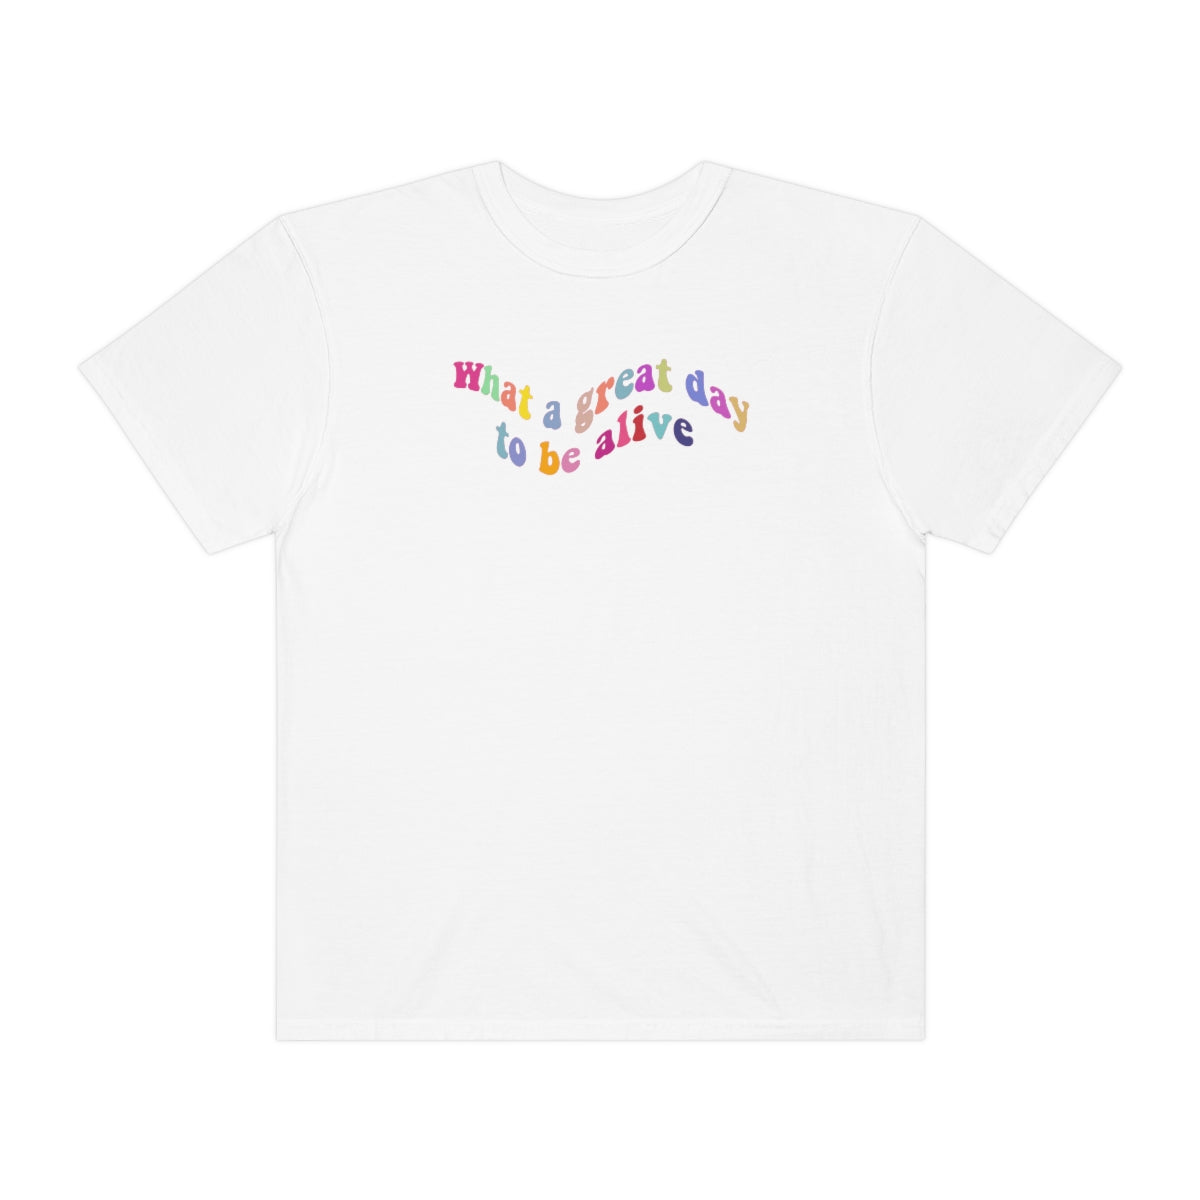 ITS A GREAT DAY TO BE ALIVE T SHIRT